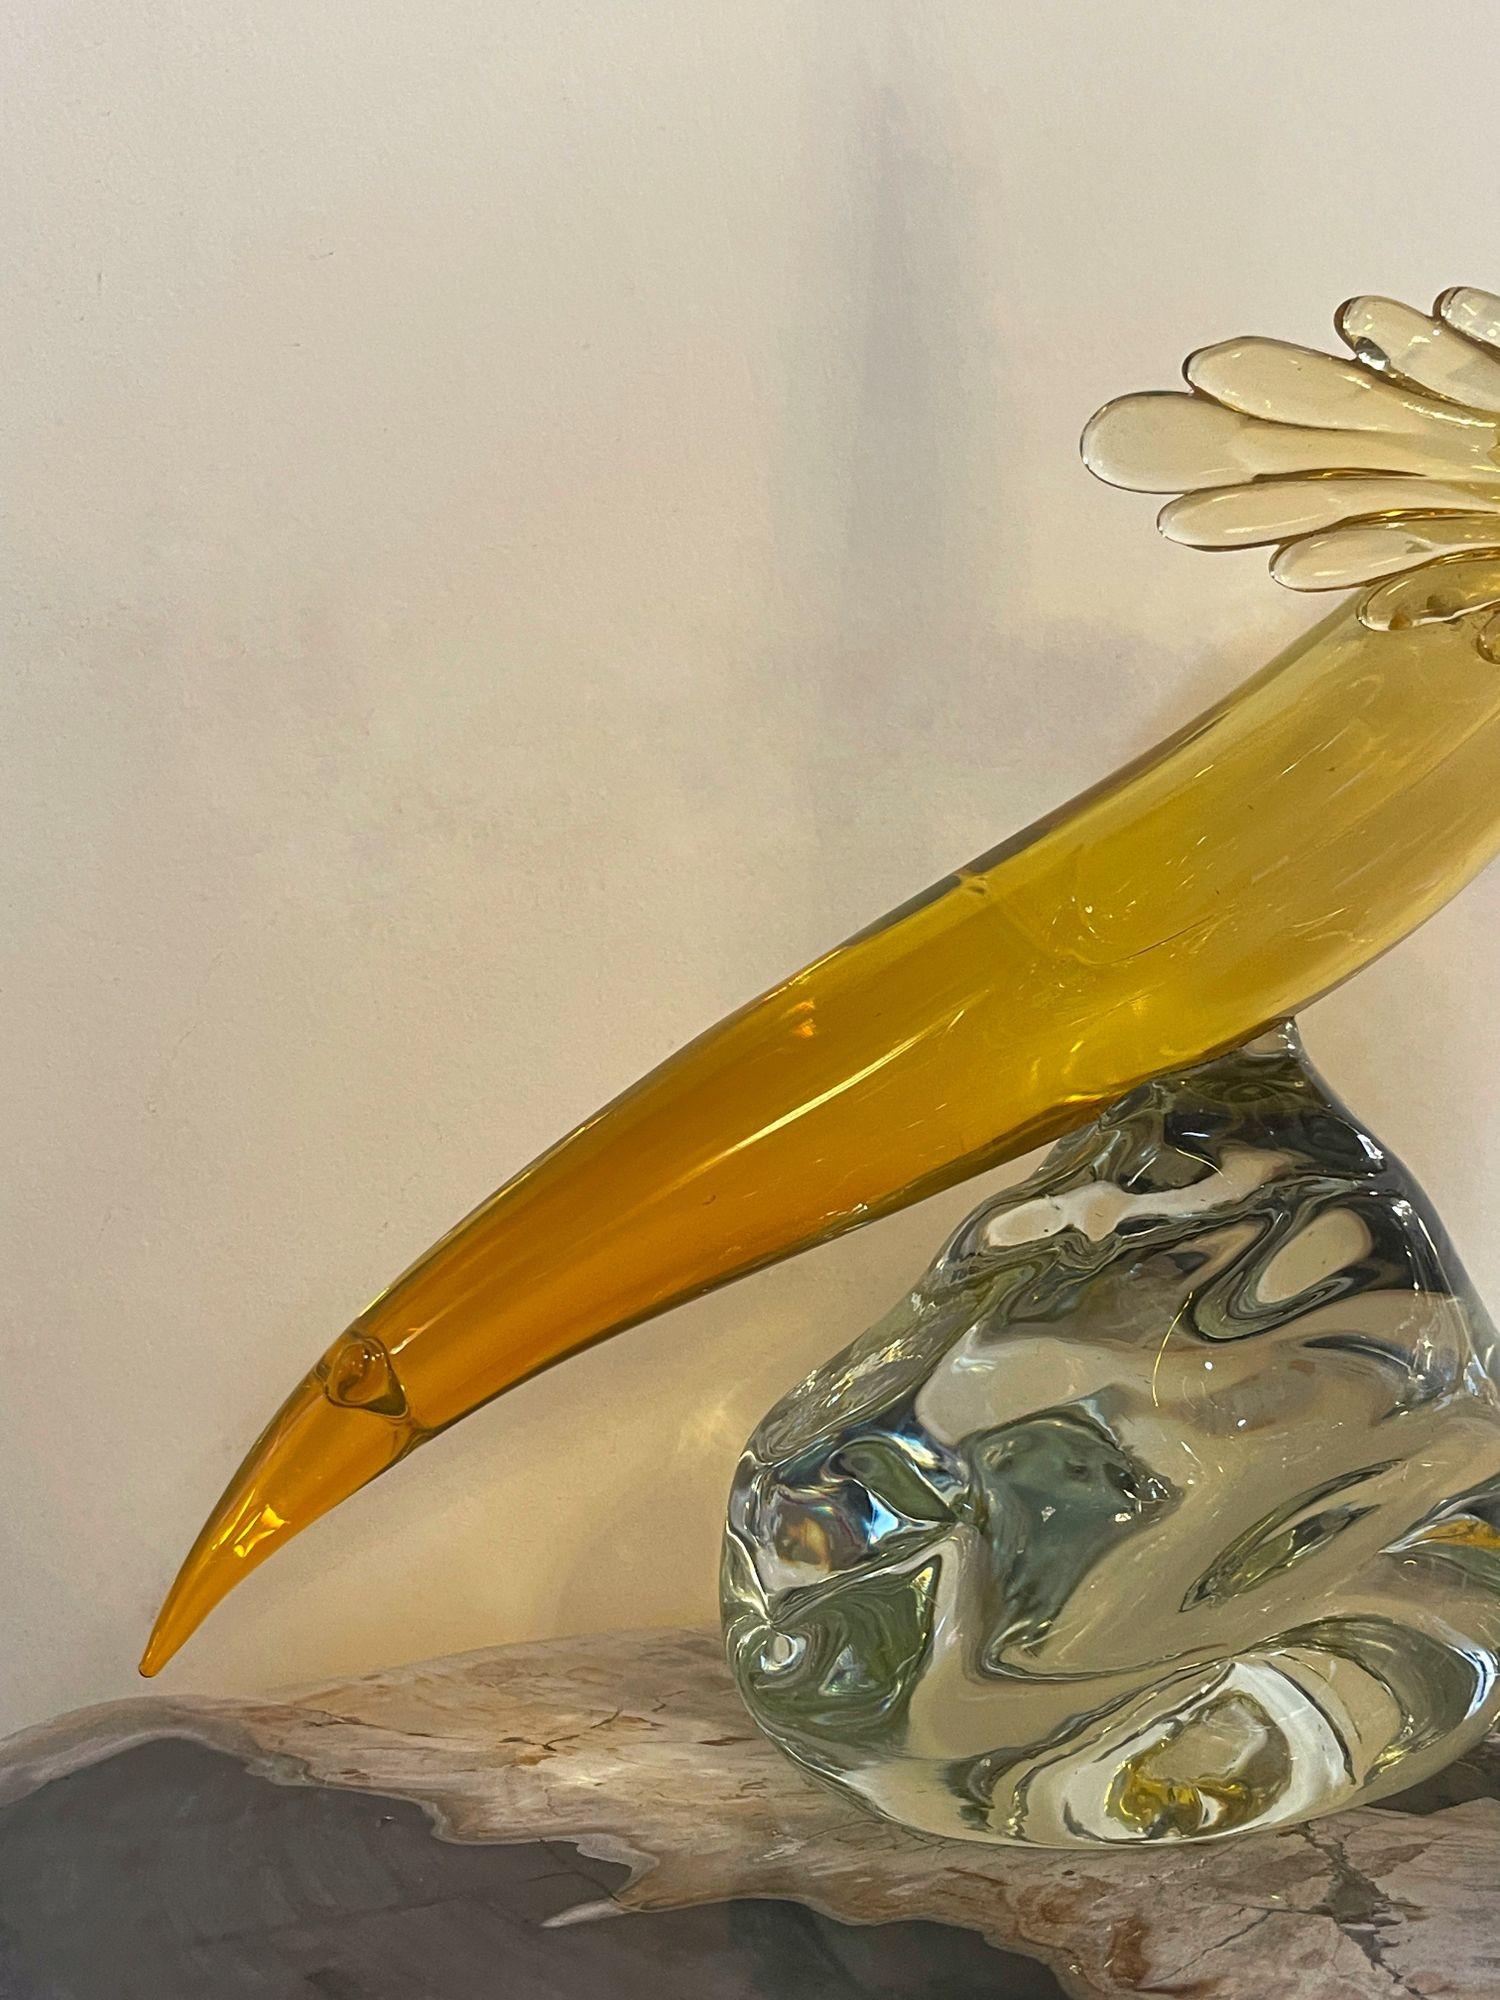 Pair of abstract handblown Murano sculptures. 
Made in Italy, c. 1970's.
 
Dimensions:
Standing Sculpture:
17